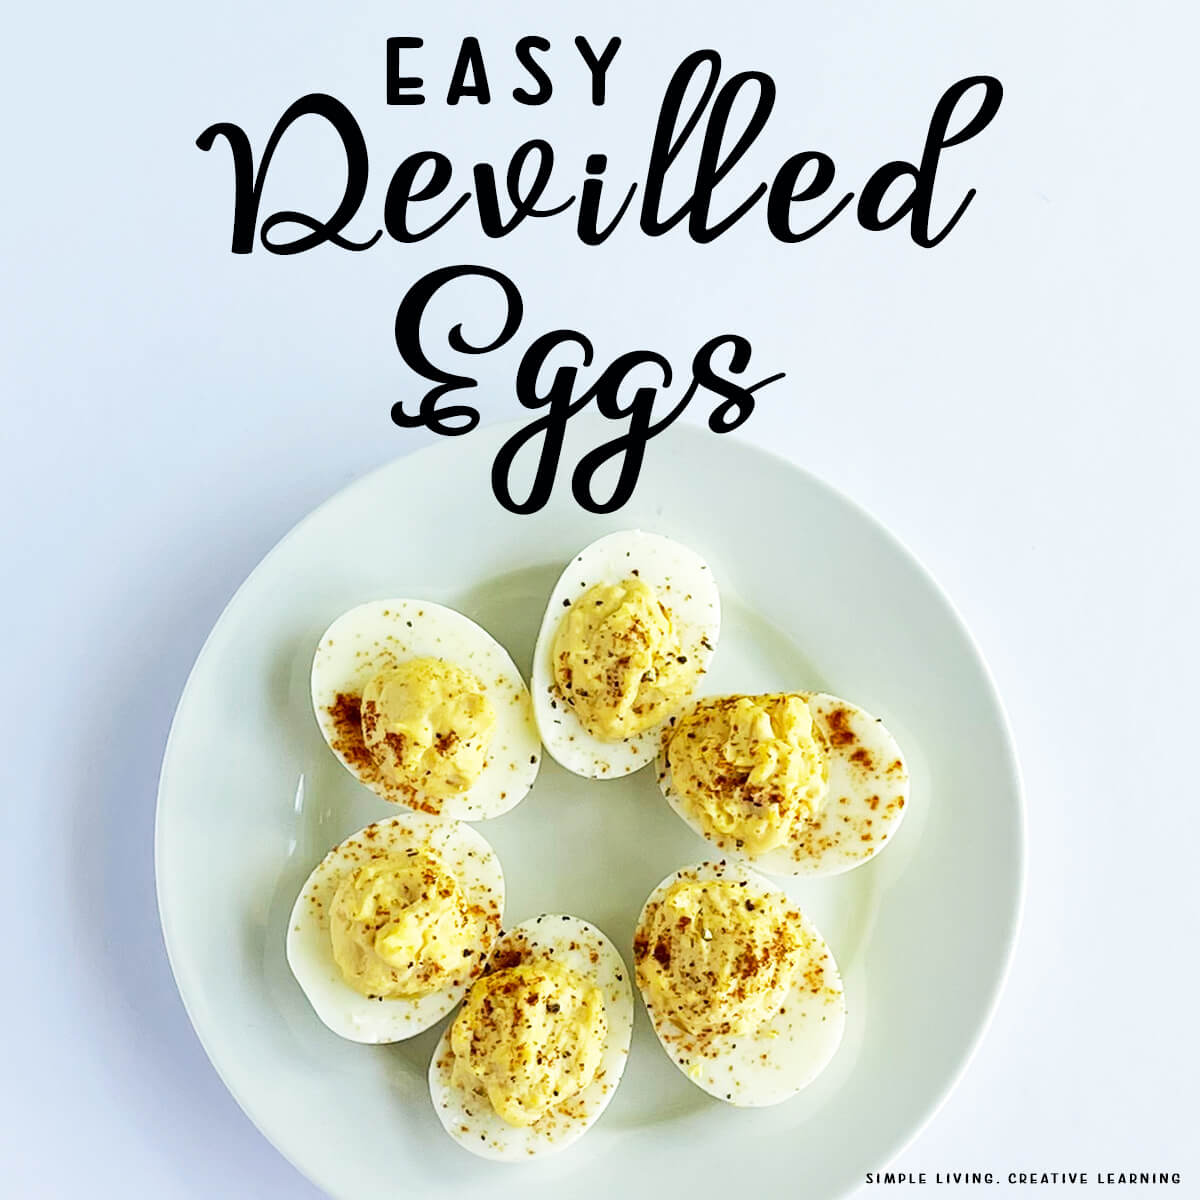 Easy Devilled Eggs on a plate